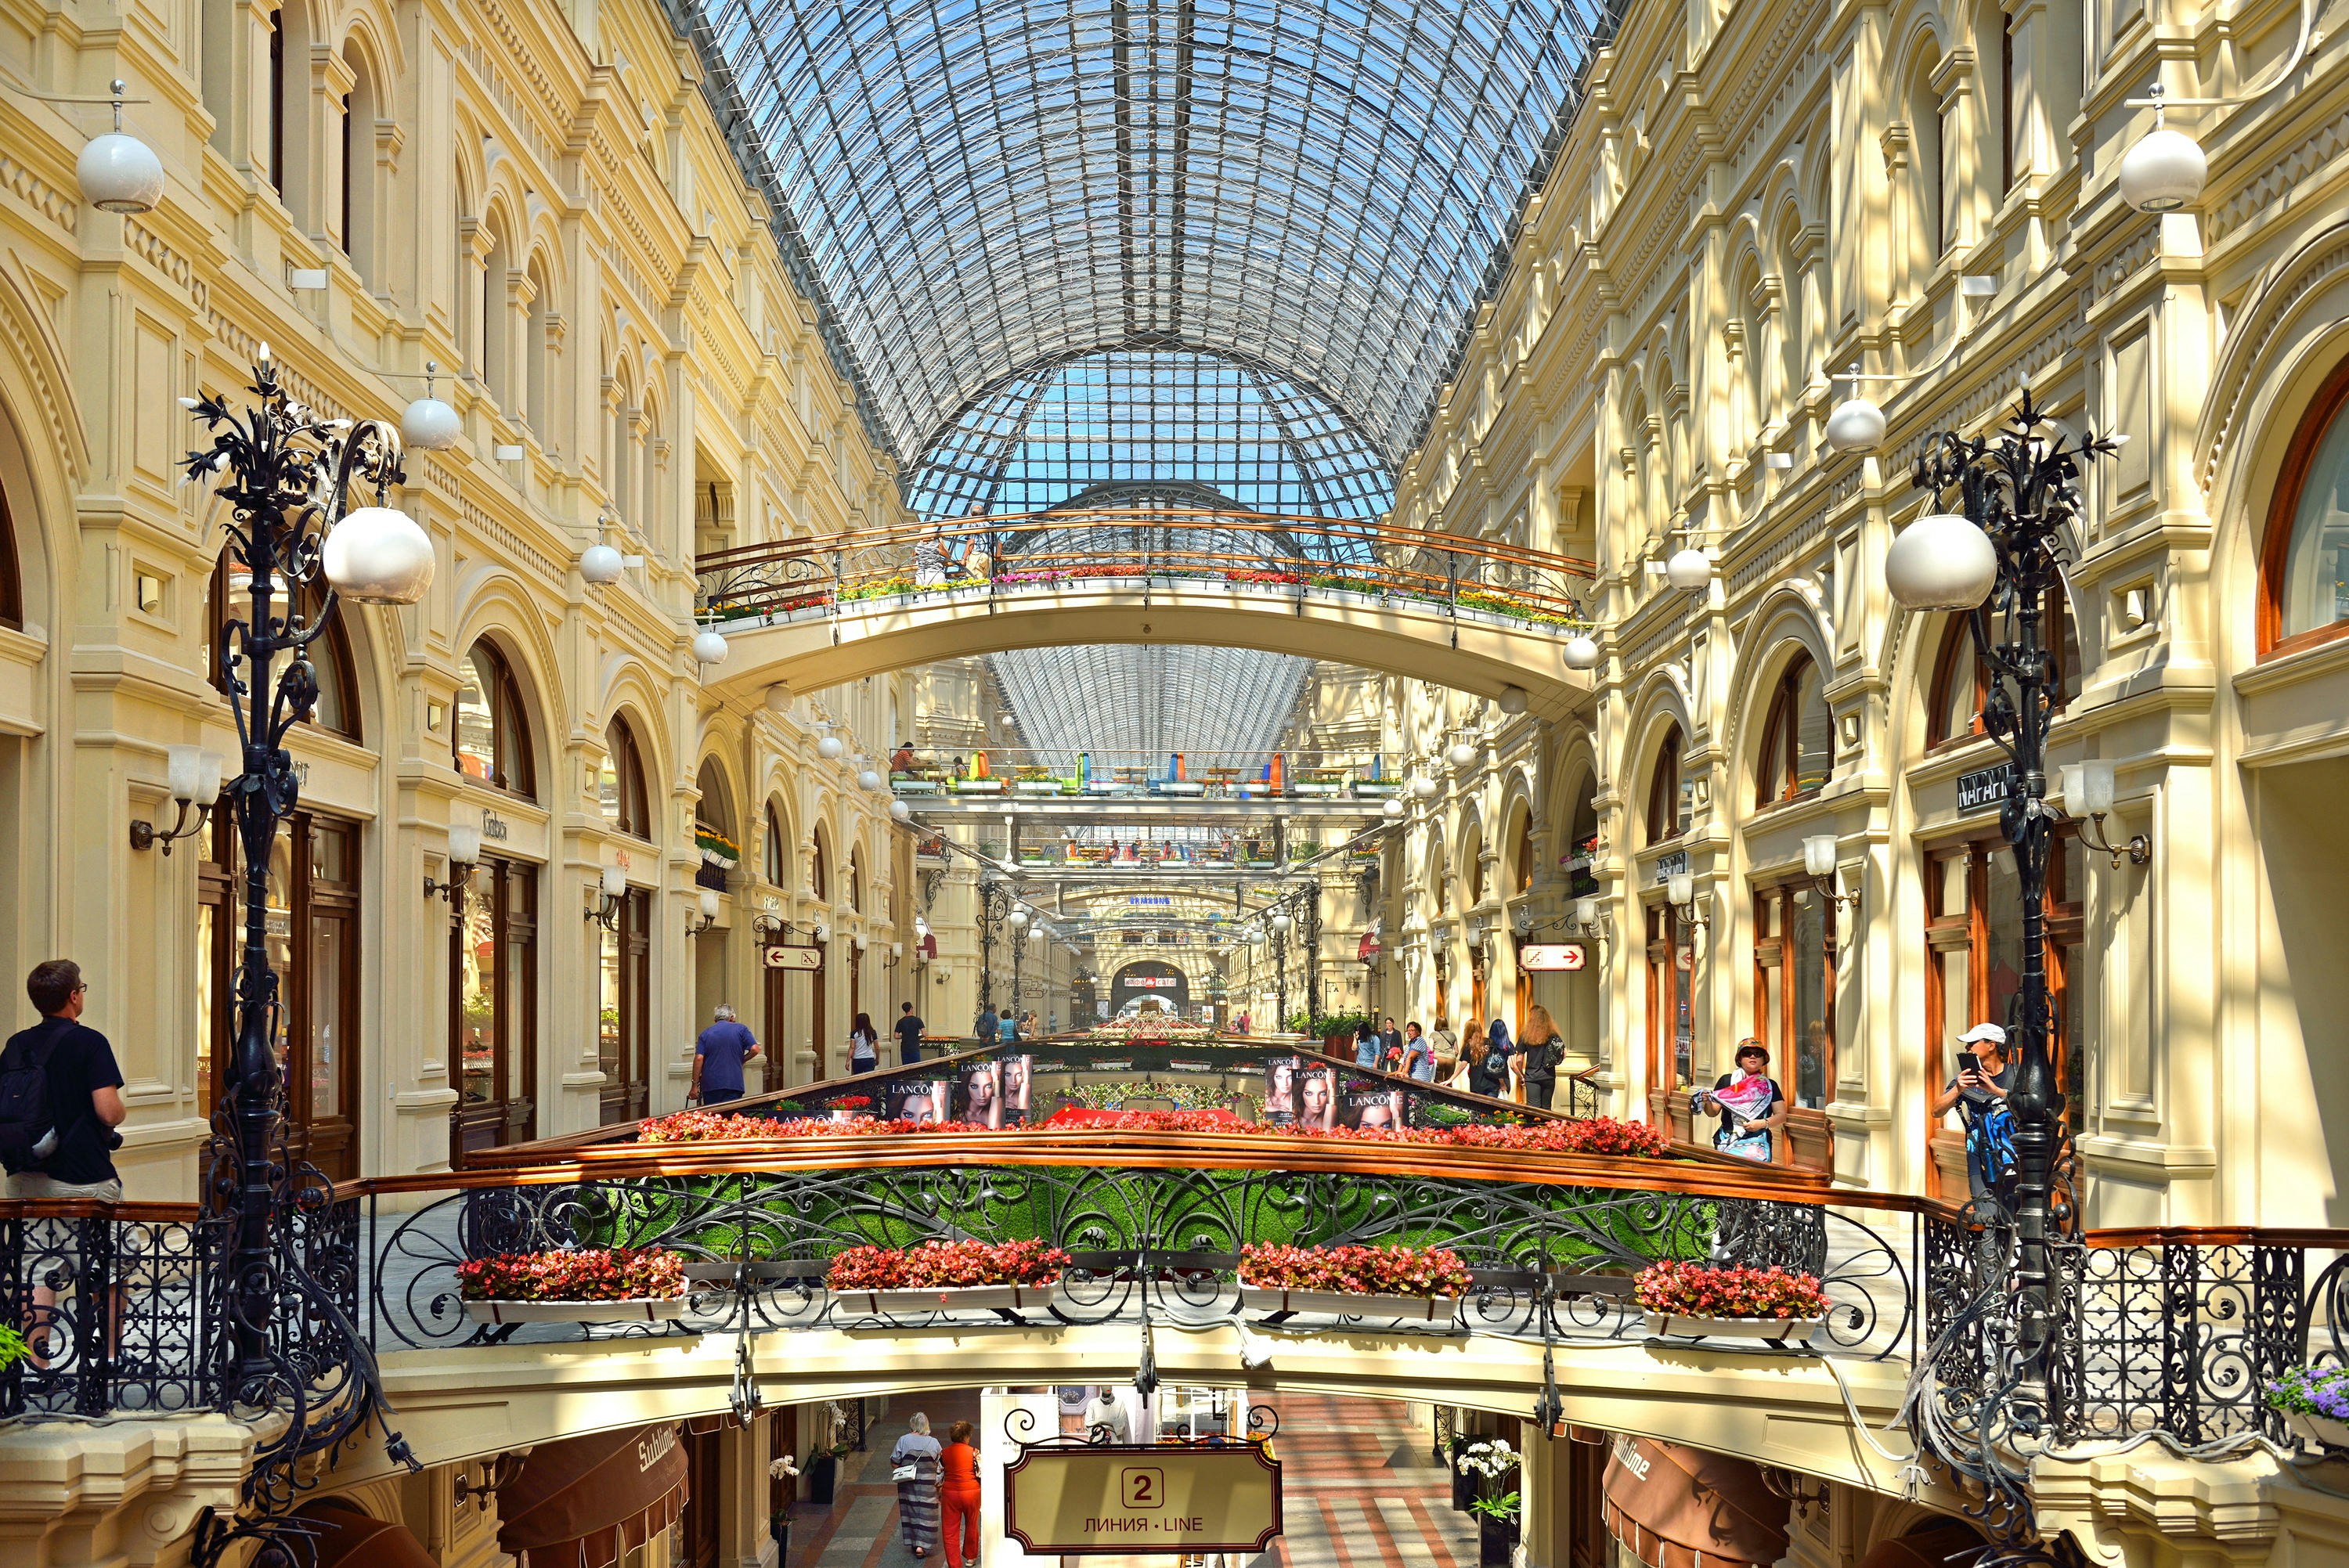 An interior view of a wide open mall, with a domed glass roof above.